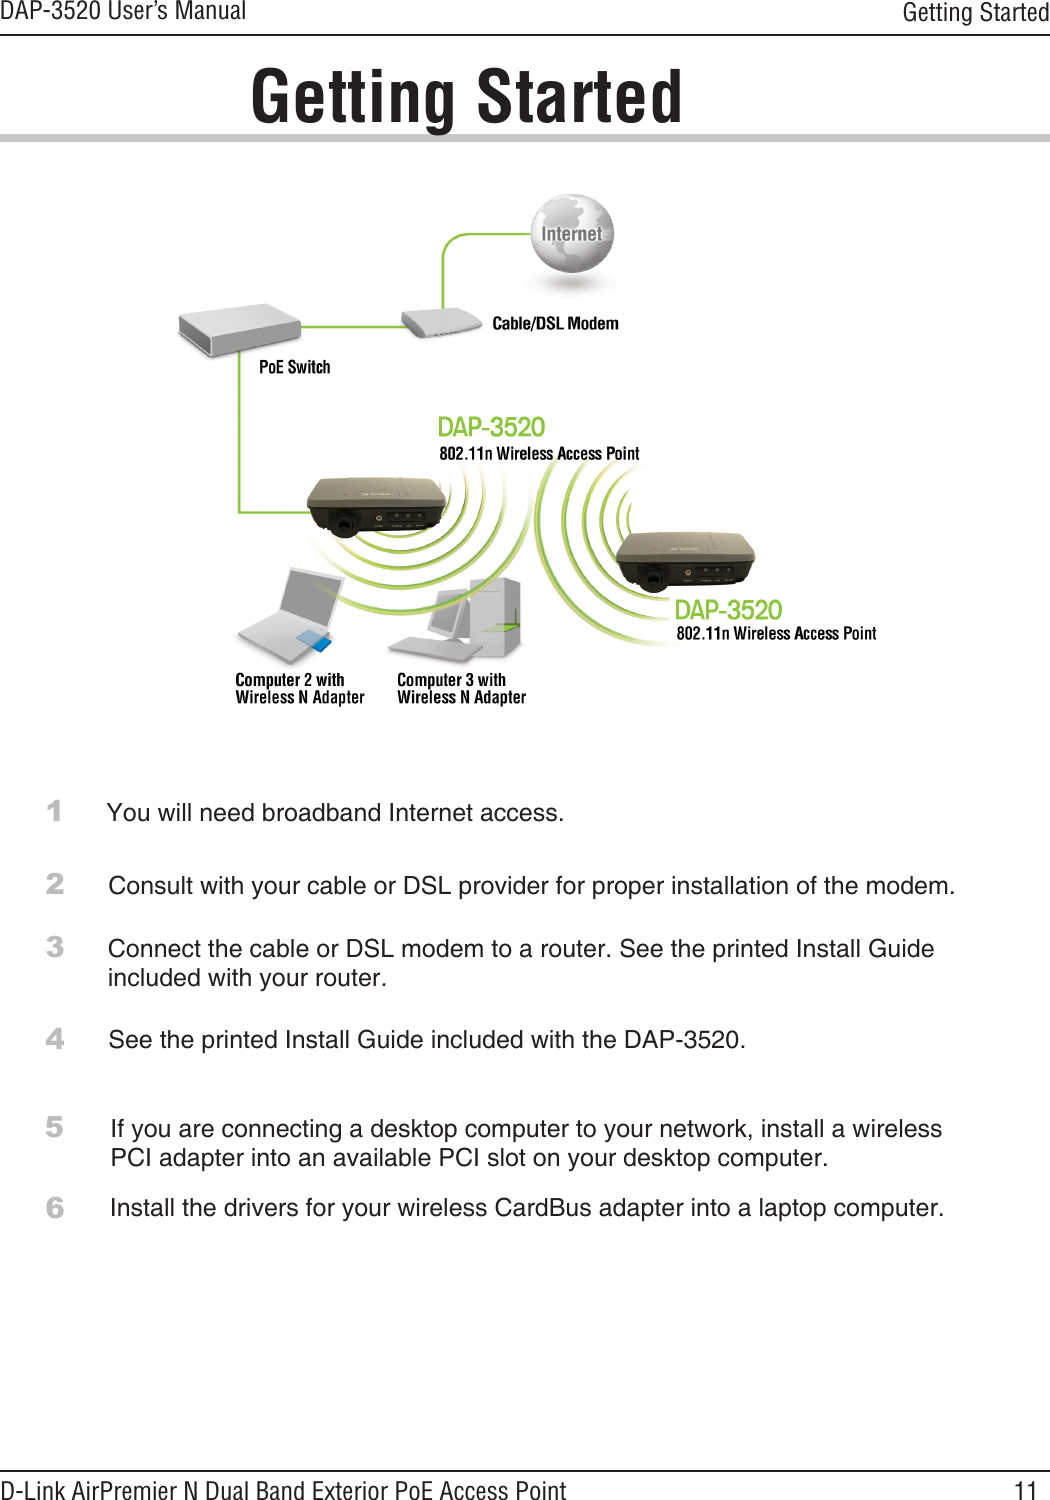 11DAP-3520 User’s ManualD-Link AirPremier N Dual Band Exterior PoE Access PointGetting StartedConsult with your cable or DSL provider for proper installation of the modem.Connect the cable or DSL modem to a router. See the printed Install Guide included with your router.If you are connecting a desktop computer to your network, install a wireless PCI adapter into an available PCI slot on your desktop computer.Install the drivers for your wireless CardBus adapter into a laptop computer.See the printed Install Guide included with the DAP-3520.23456You will need broadband Internet access.1Getting Started